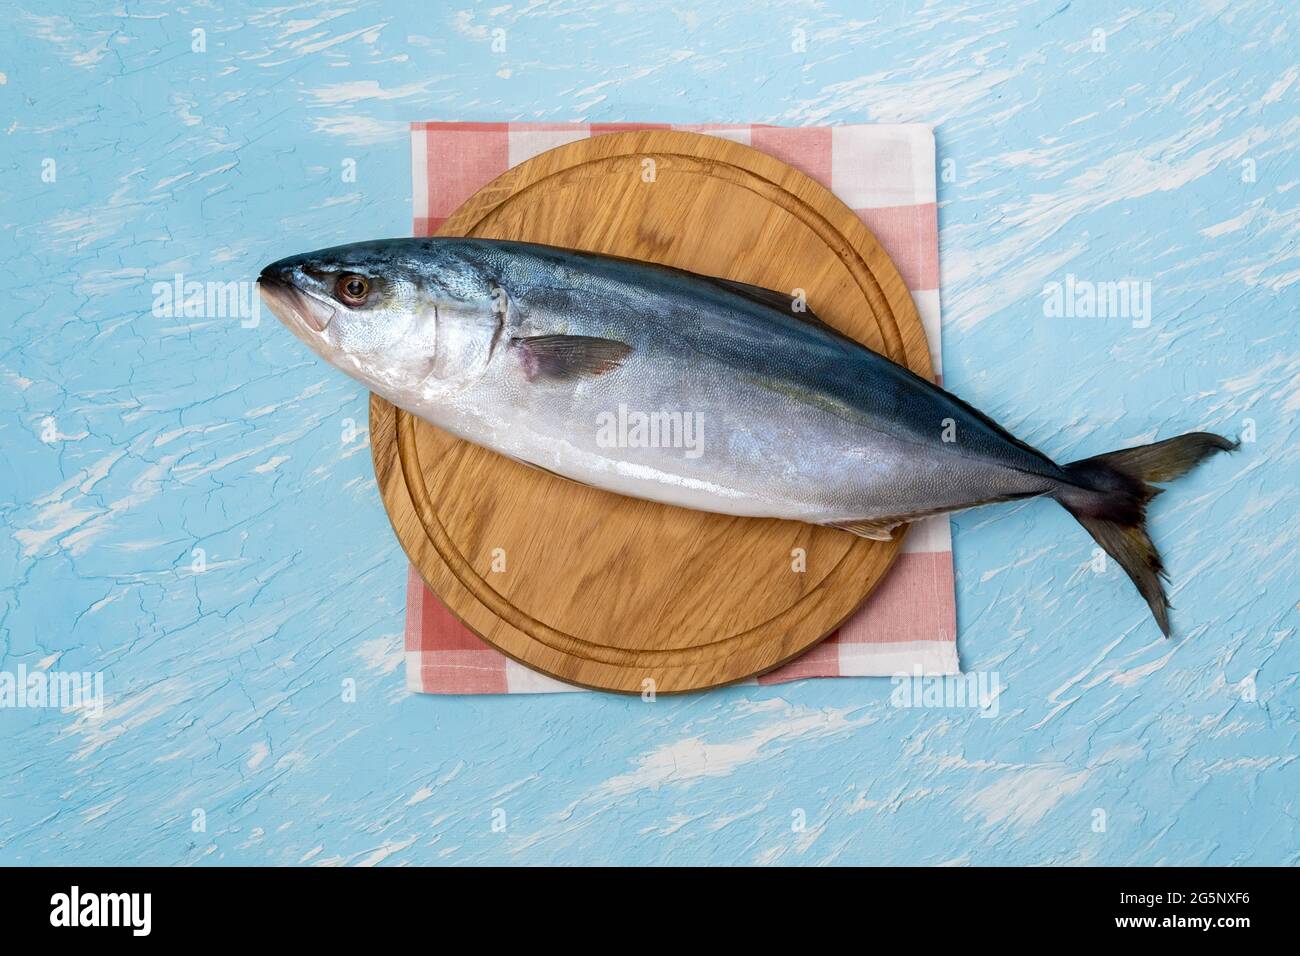 yellow tailed lacedra is a species of sea ray finned fish in the family Carangidae. on a blue background Stock Photo